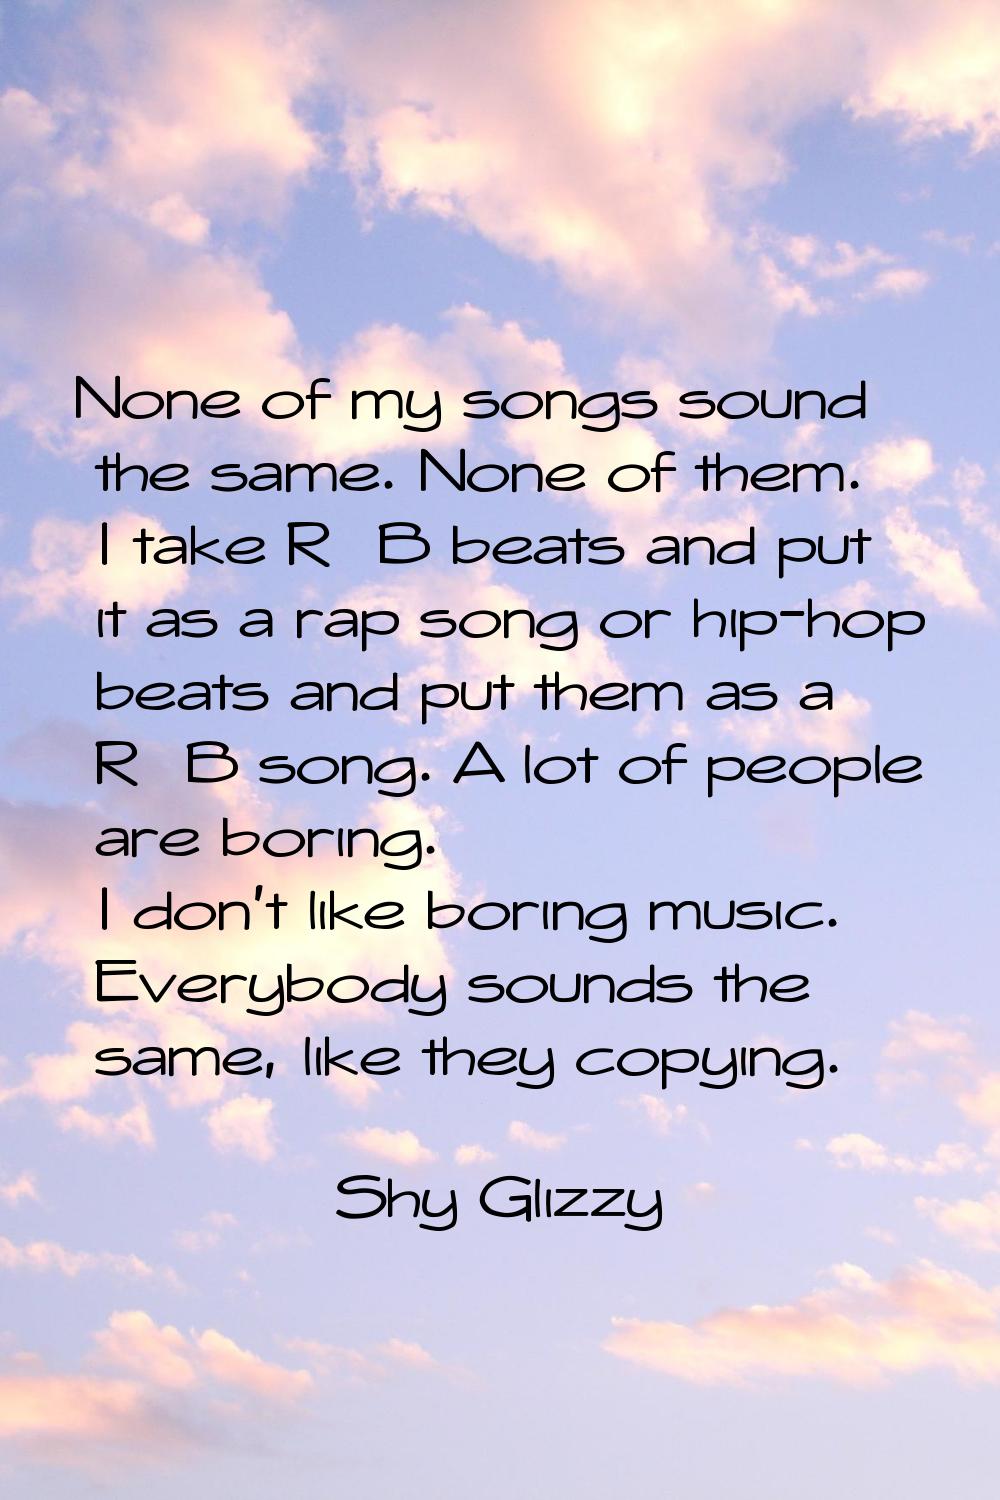 None of my songs sound the same. None of them. I take R&B beats and put it as a rap song or hip-hop